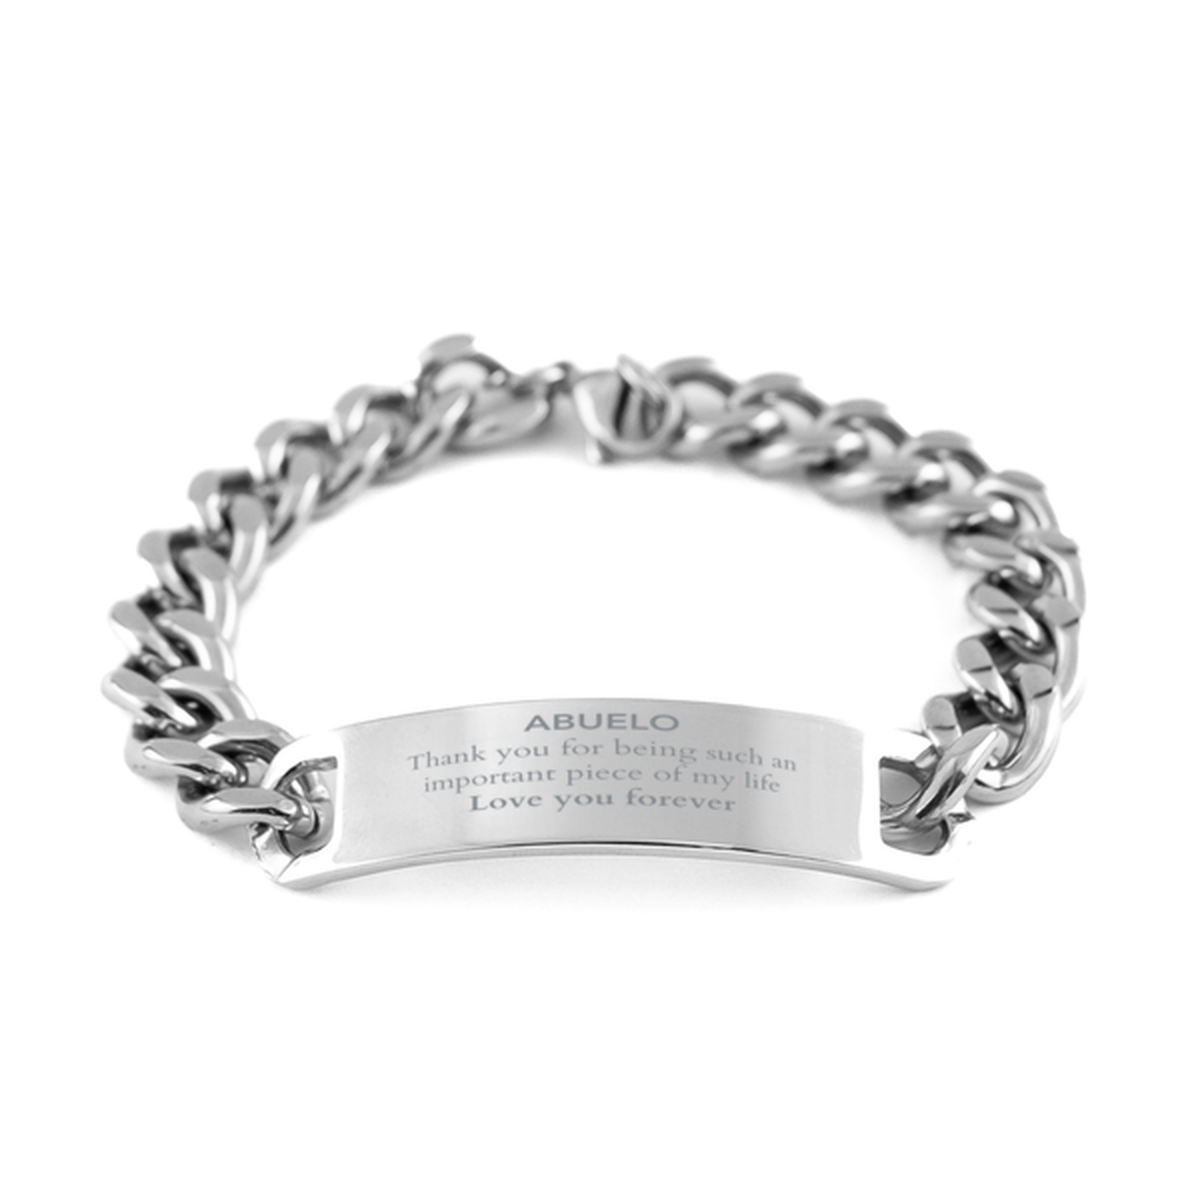 Appropriate Abuelo Cuban Chain Stainless Steel Bracelet Epic Birthday Gifts for Abuelo Thank you for being such an important piece of my life Abuelo Christmas Mothers Fathers Day